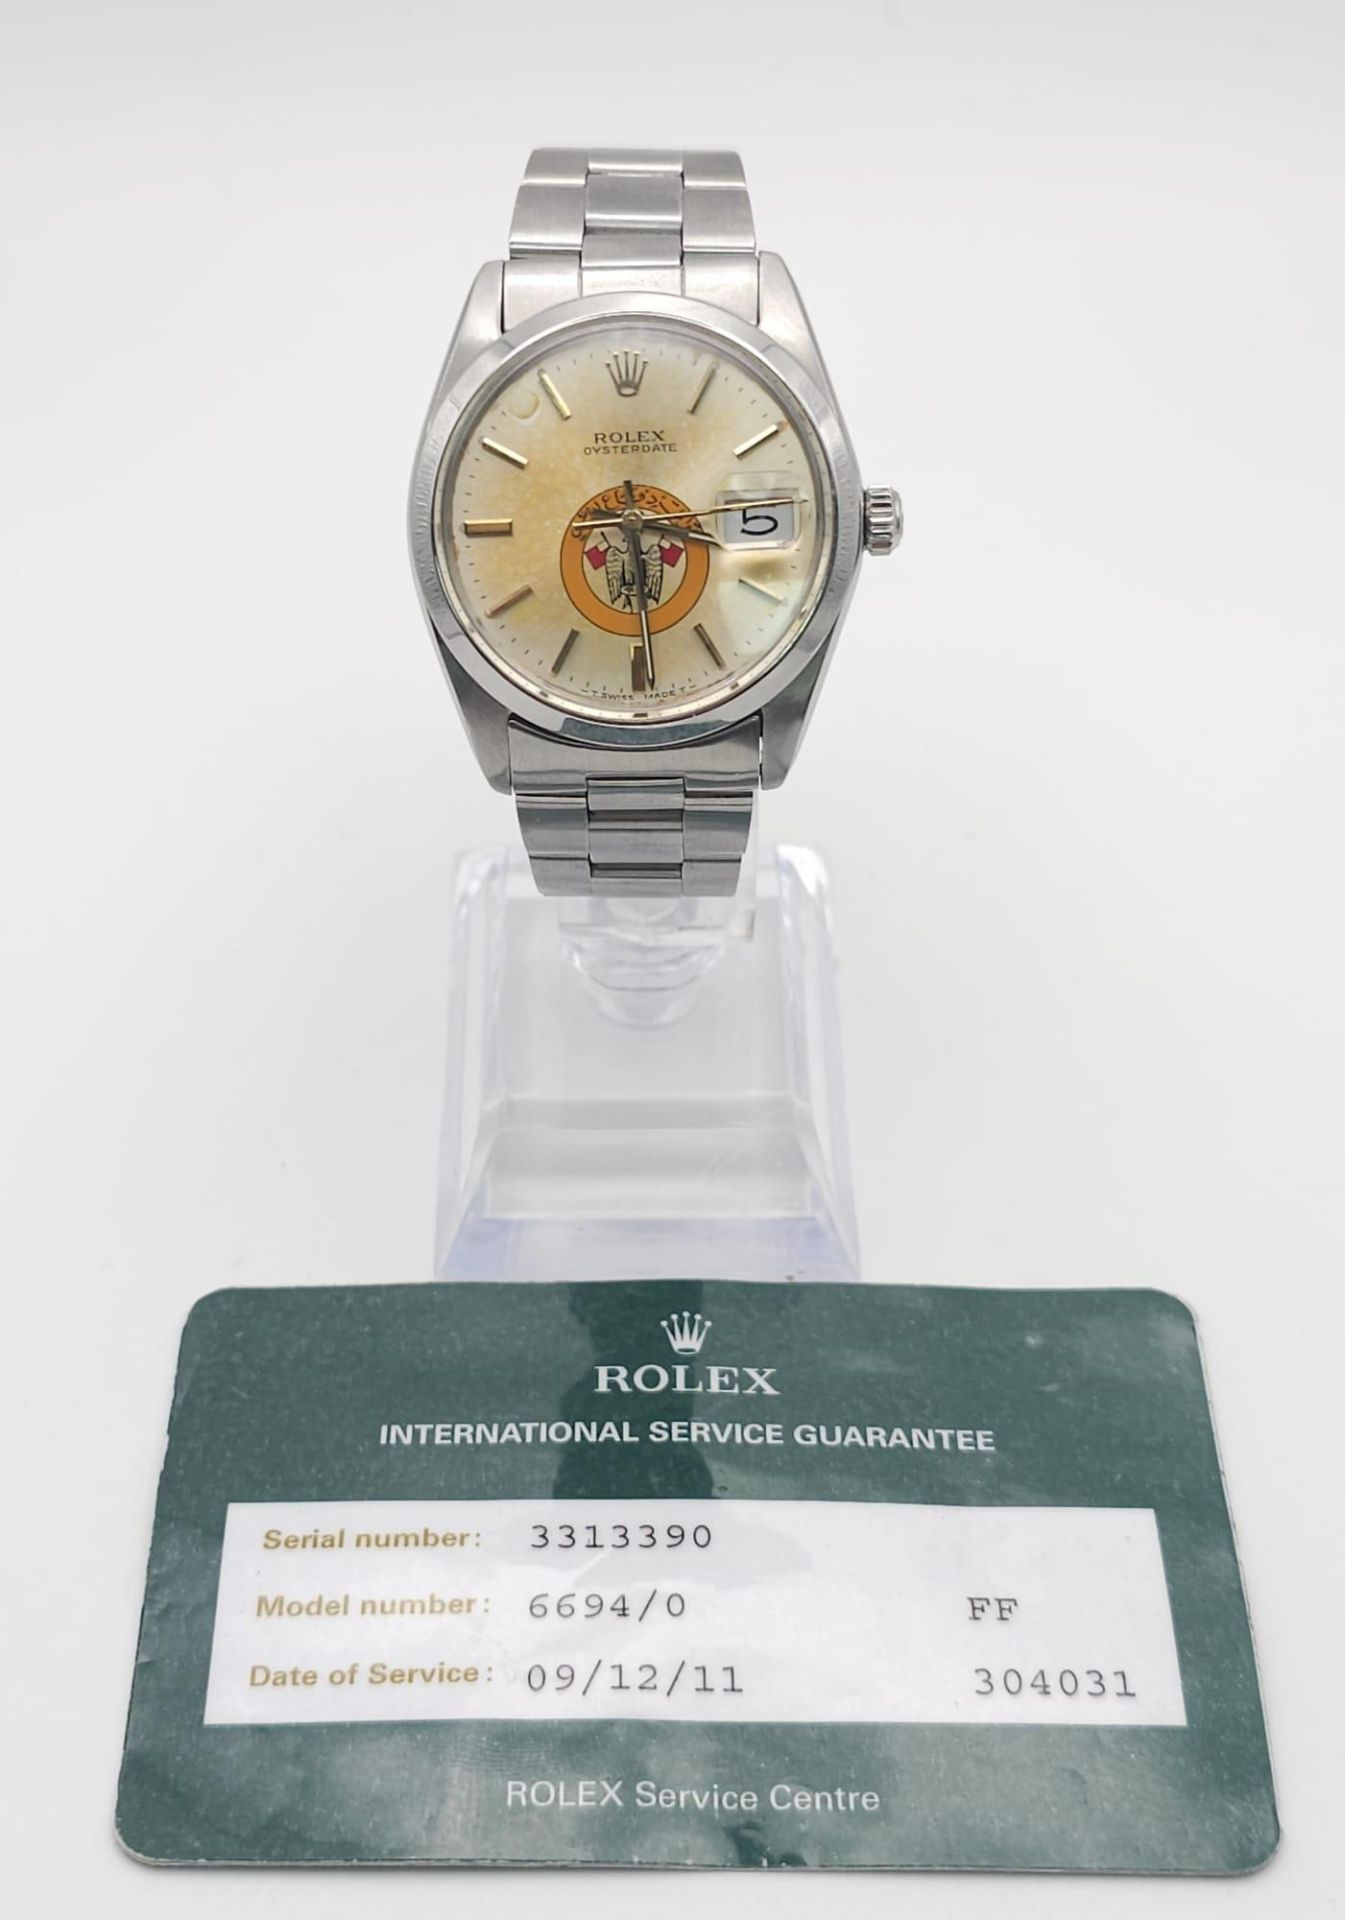 A ROLEX OYSTERDATE IN STAINLESS STEEL SPORTING THE EAGLE LOGO OF ABU DHABI .(DIAL NEEDS CLEANING) - Image 13 of 13